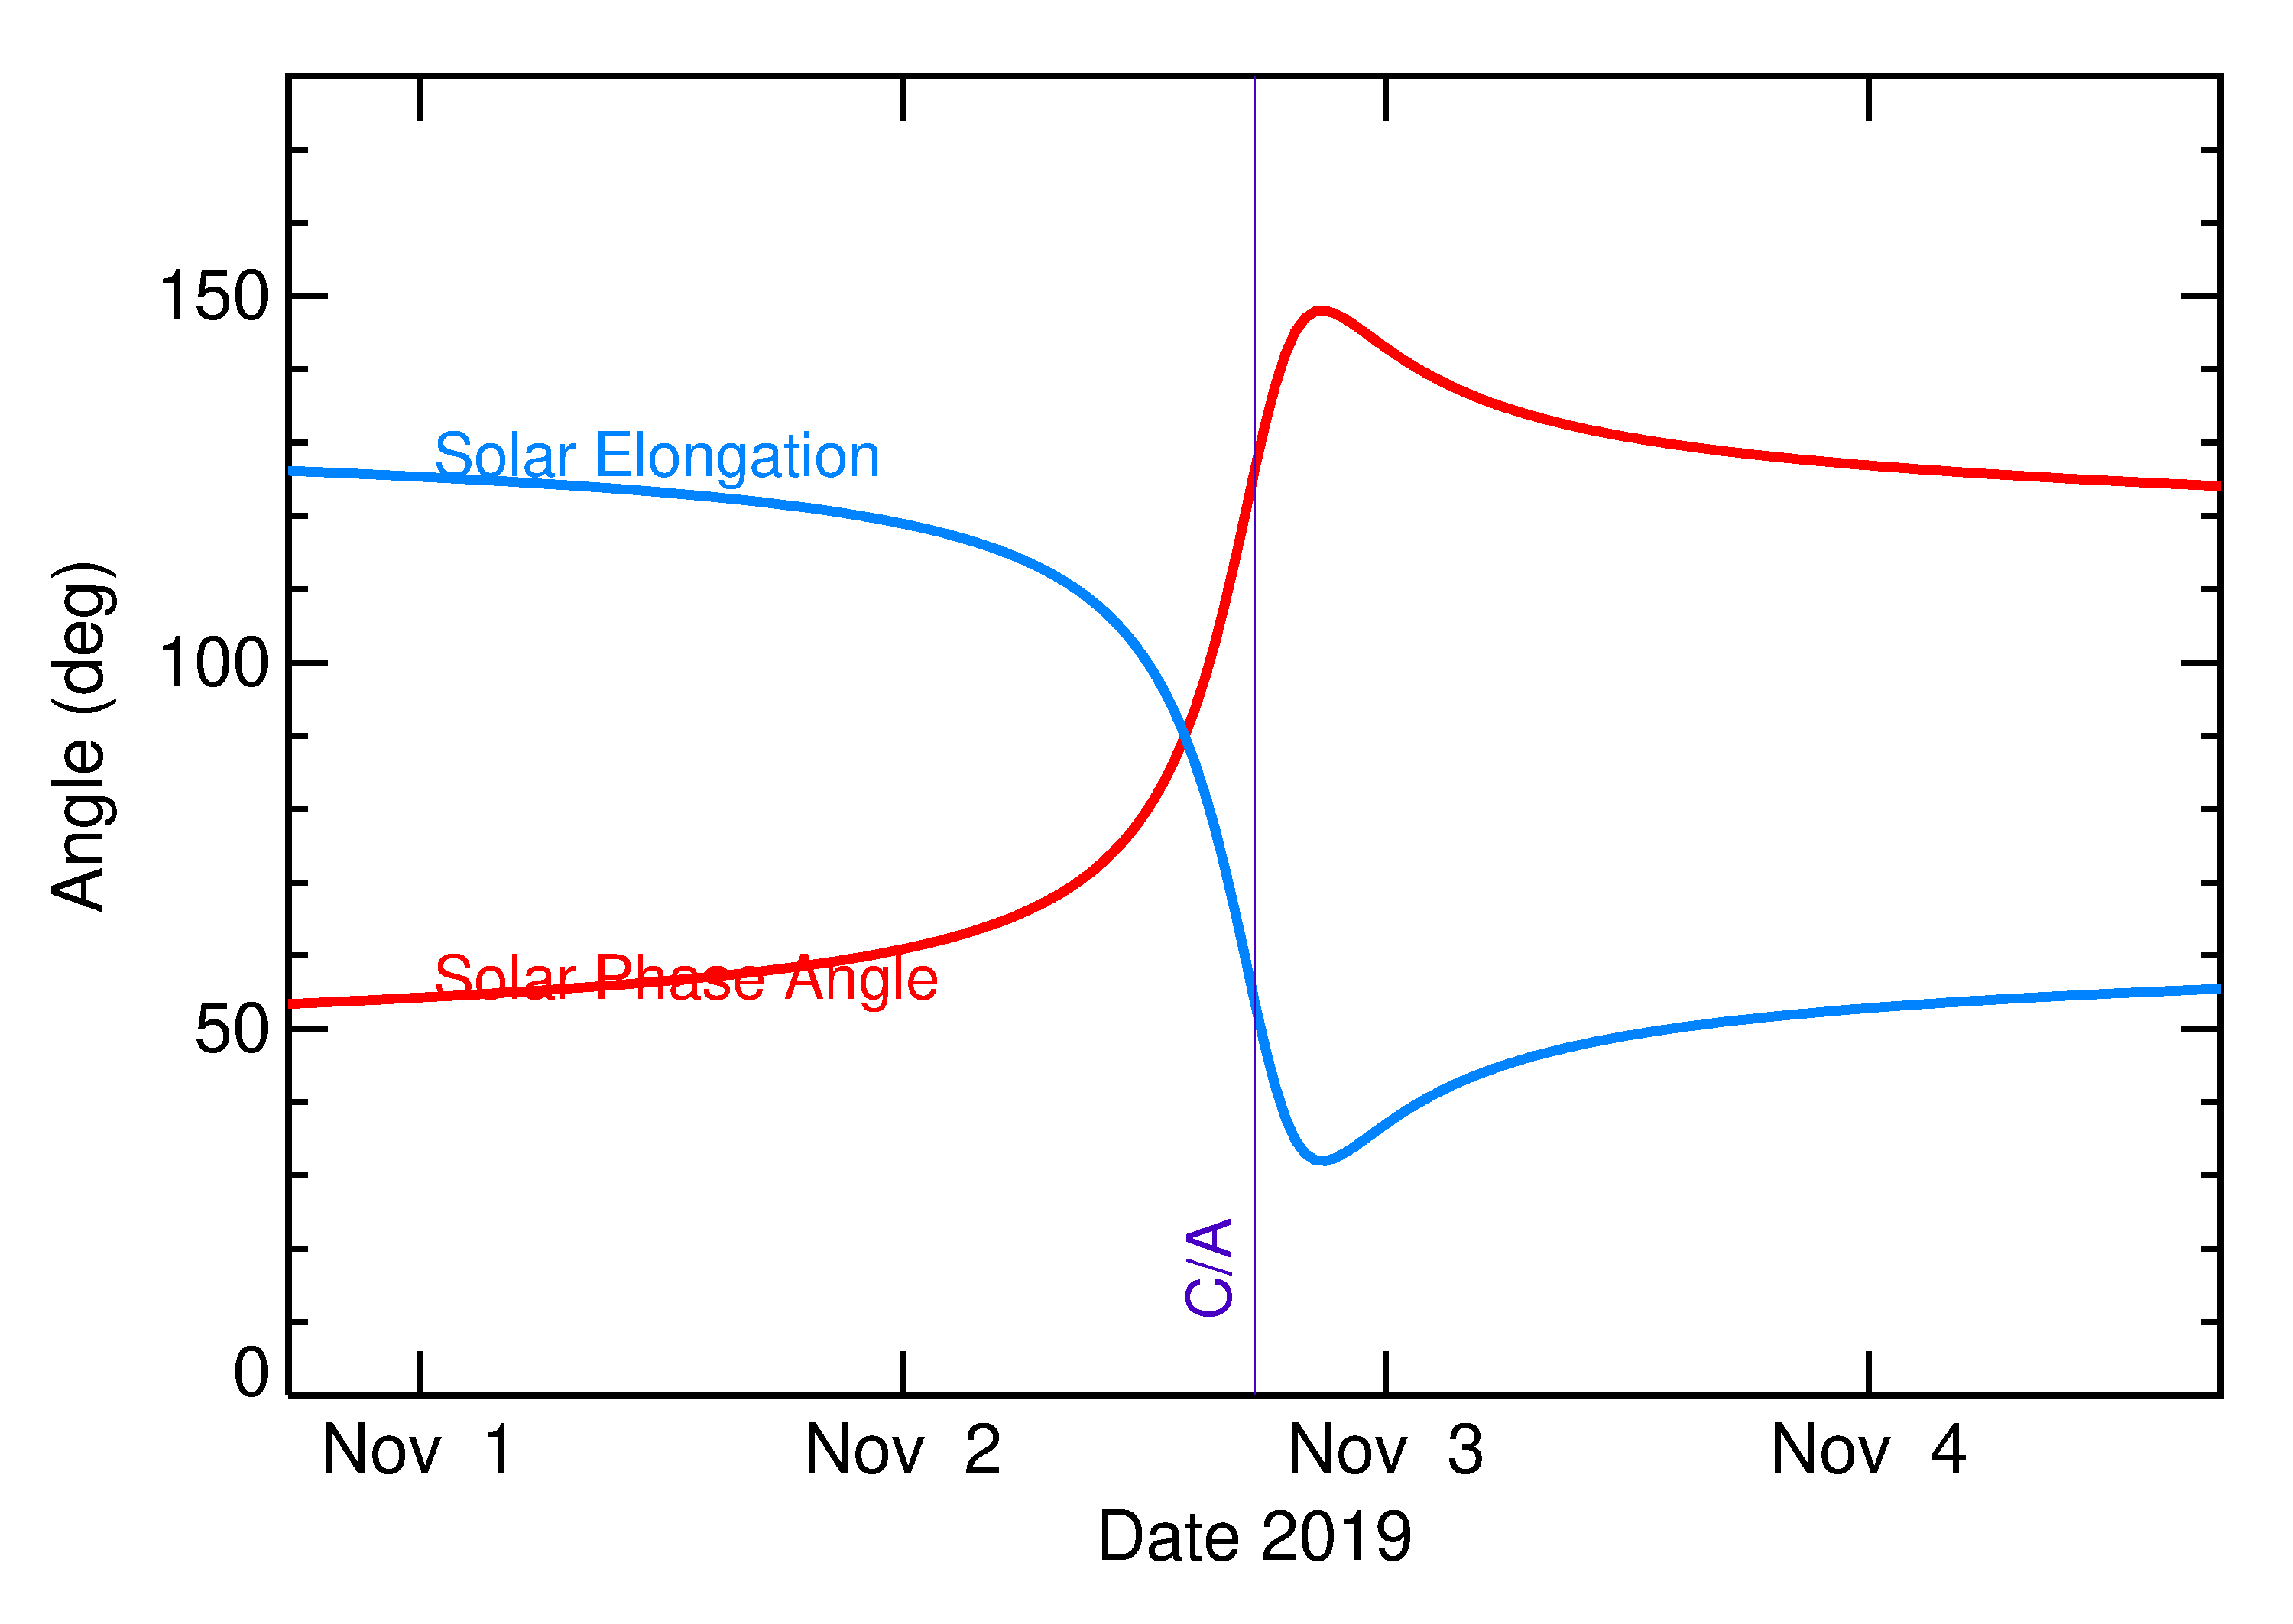 Solar Elongation and Solar Phase Angle of 2019 VA in the days around closest approach